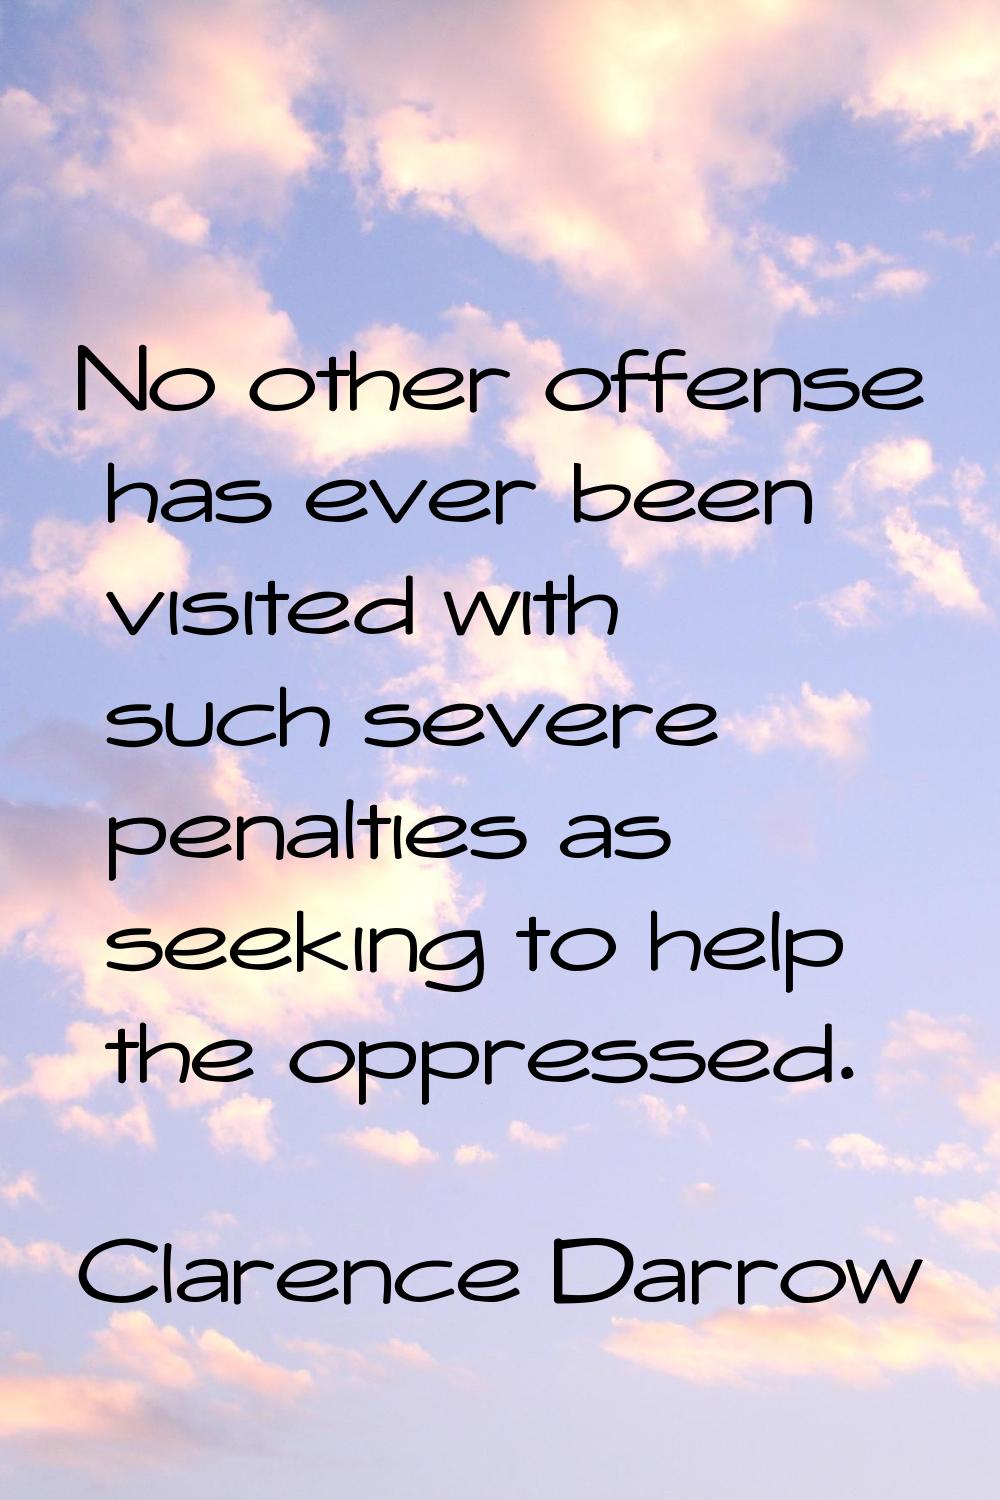 No other offense has ever been visited with such severe penalties as seeking to help the oppressed.